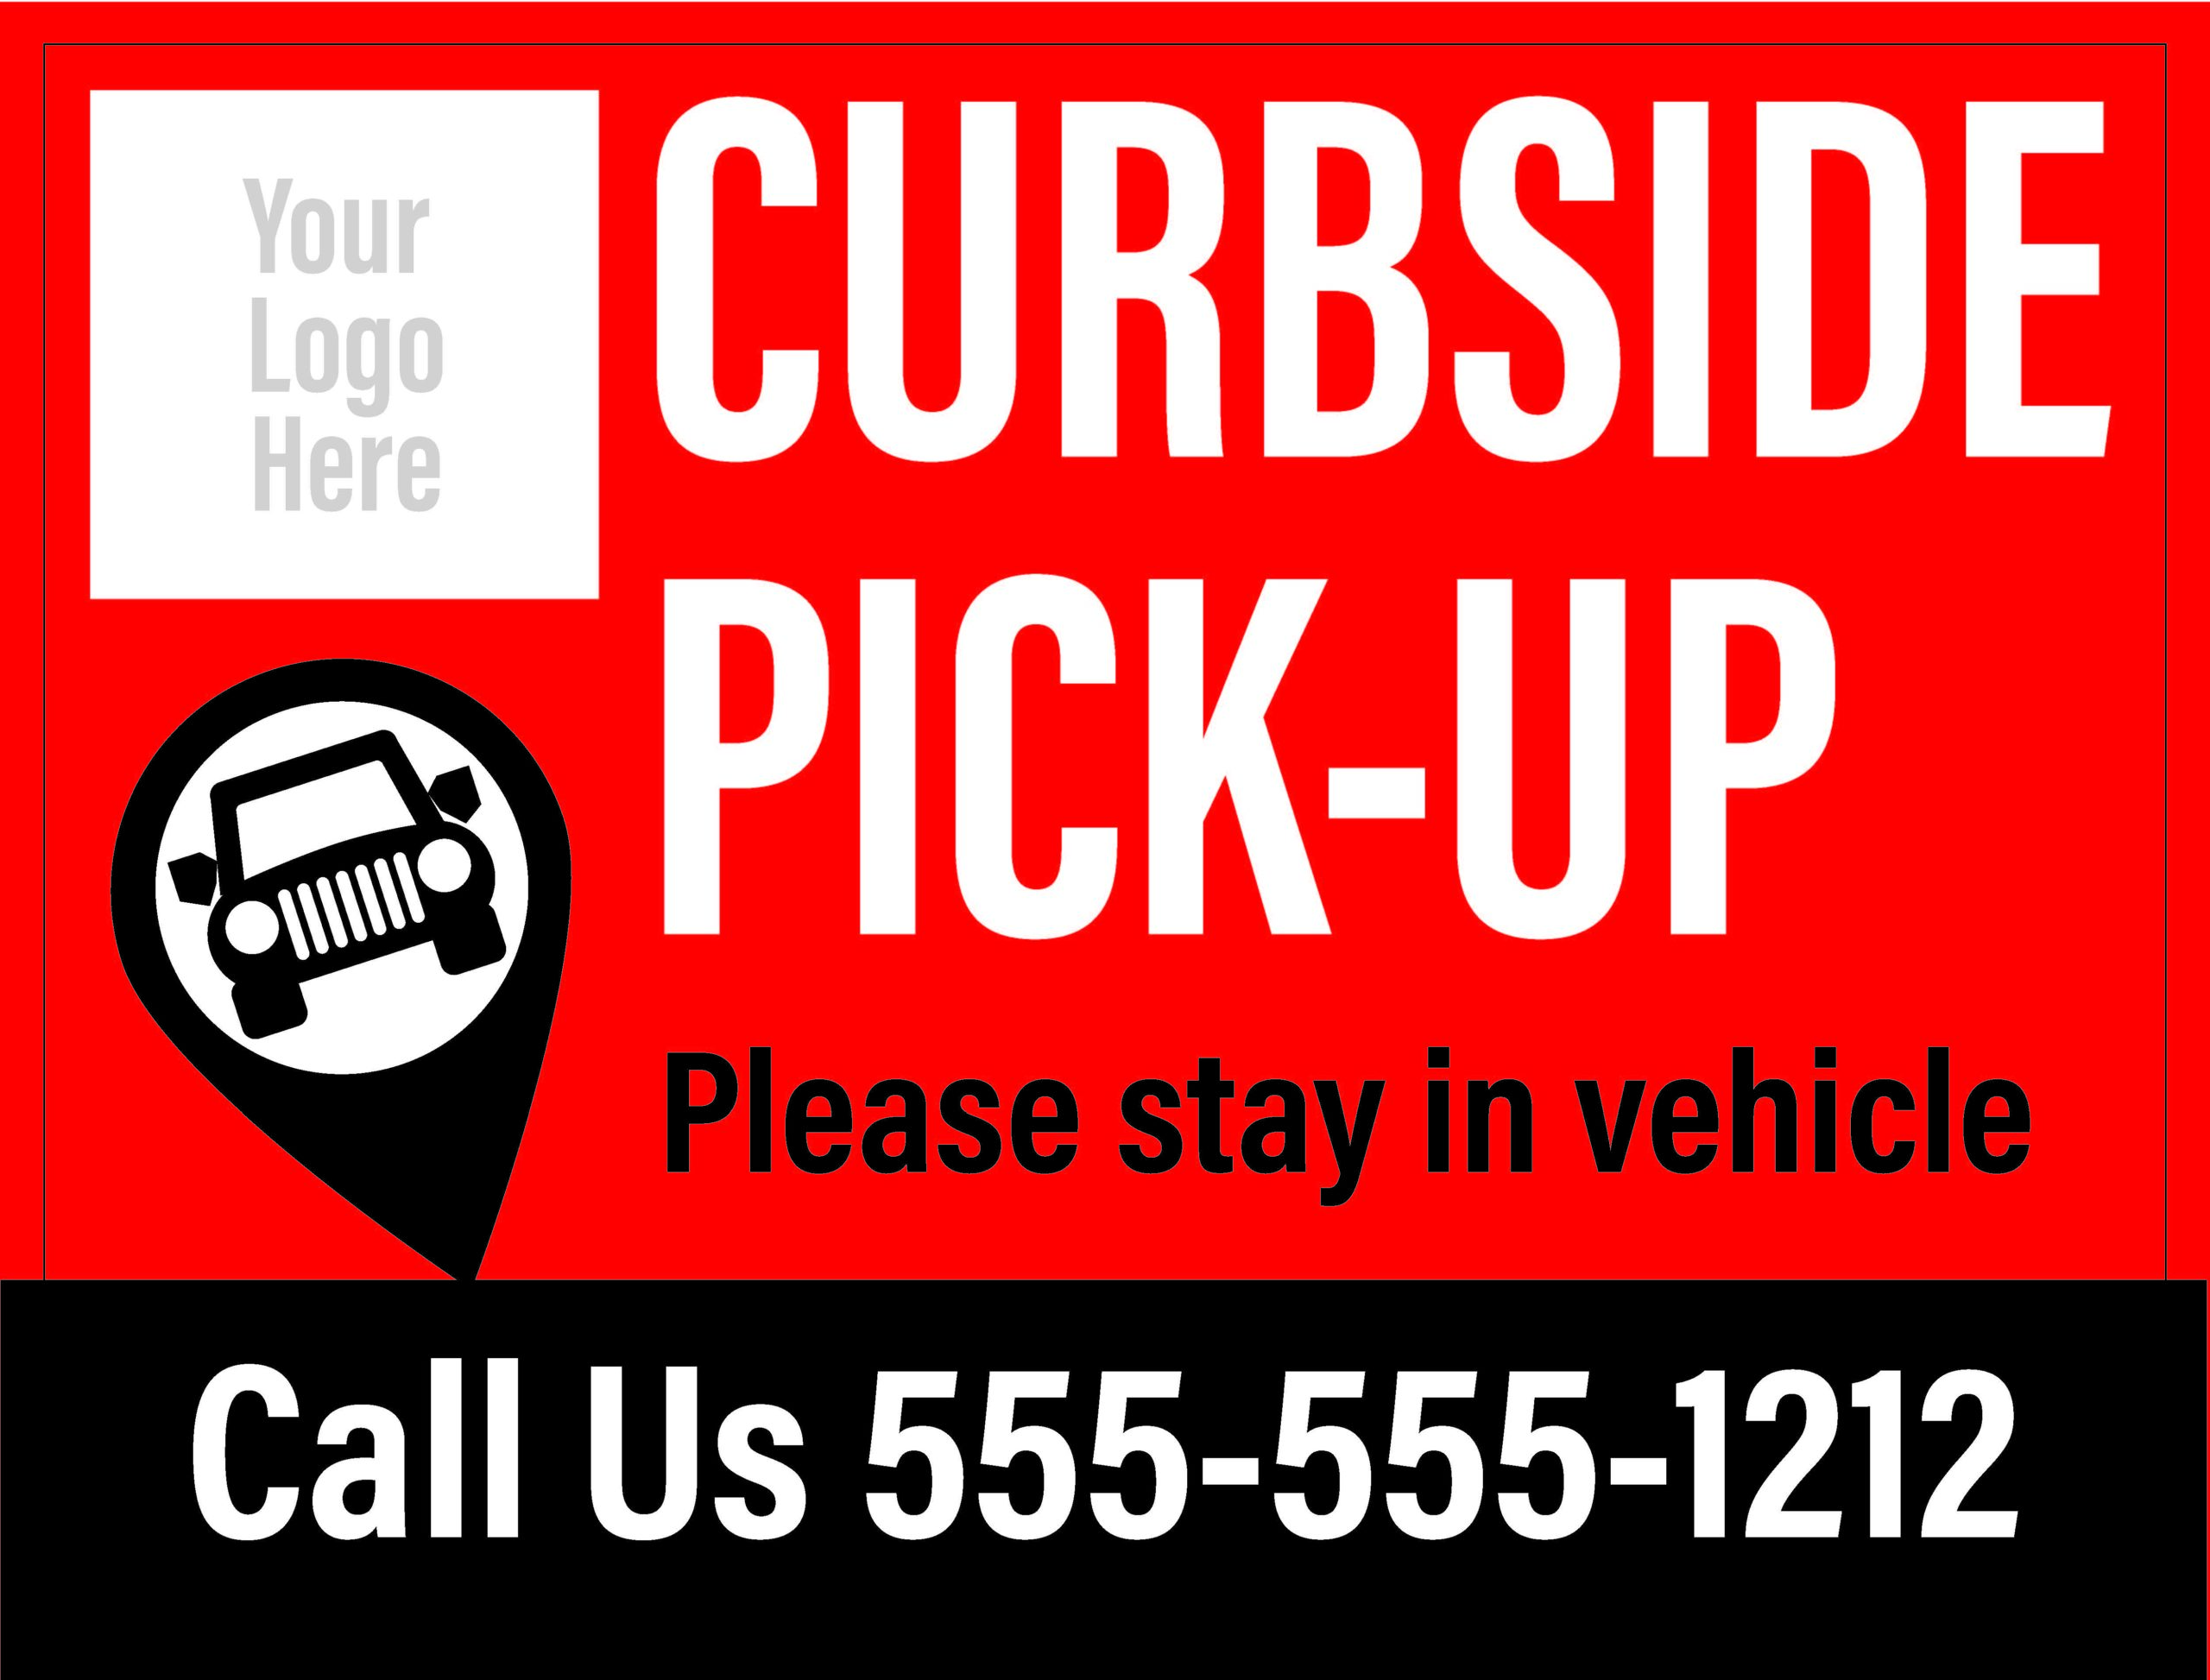 Curbside Pickup Signs 24”x 18” on white corrugated plastic with metal stand(red stay in vehicle #2) — 2 pack